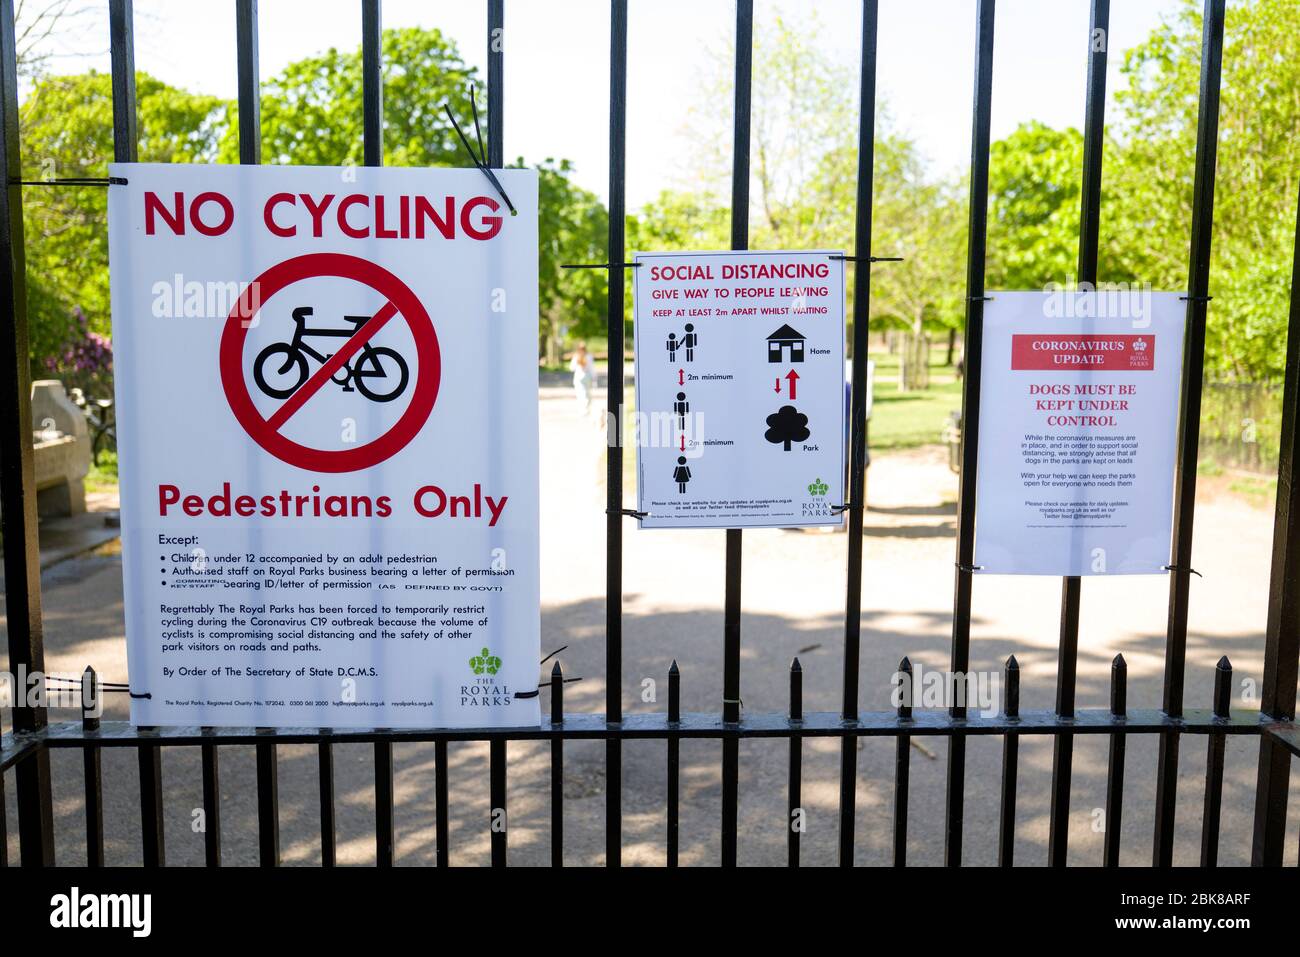 Social distancing in Richmond Park. No cycling in allowed in Richmond Park. Pedestrians only. Stock Photo